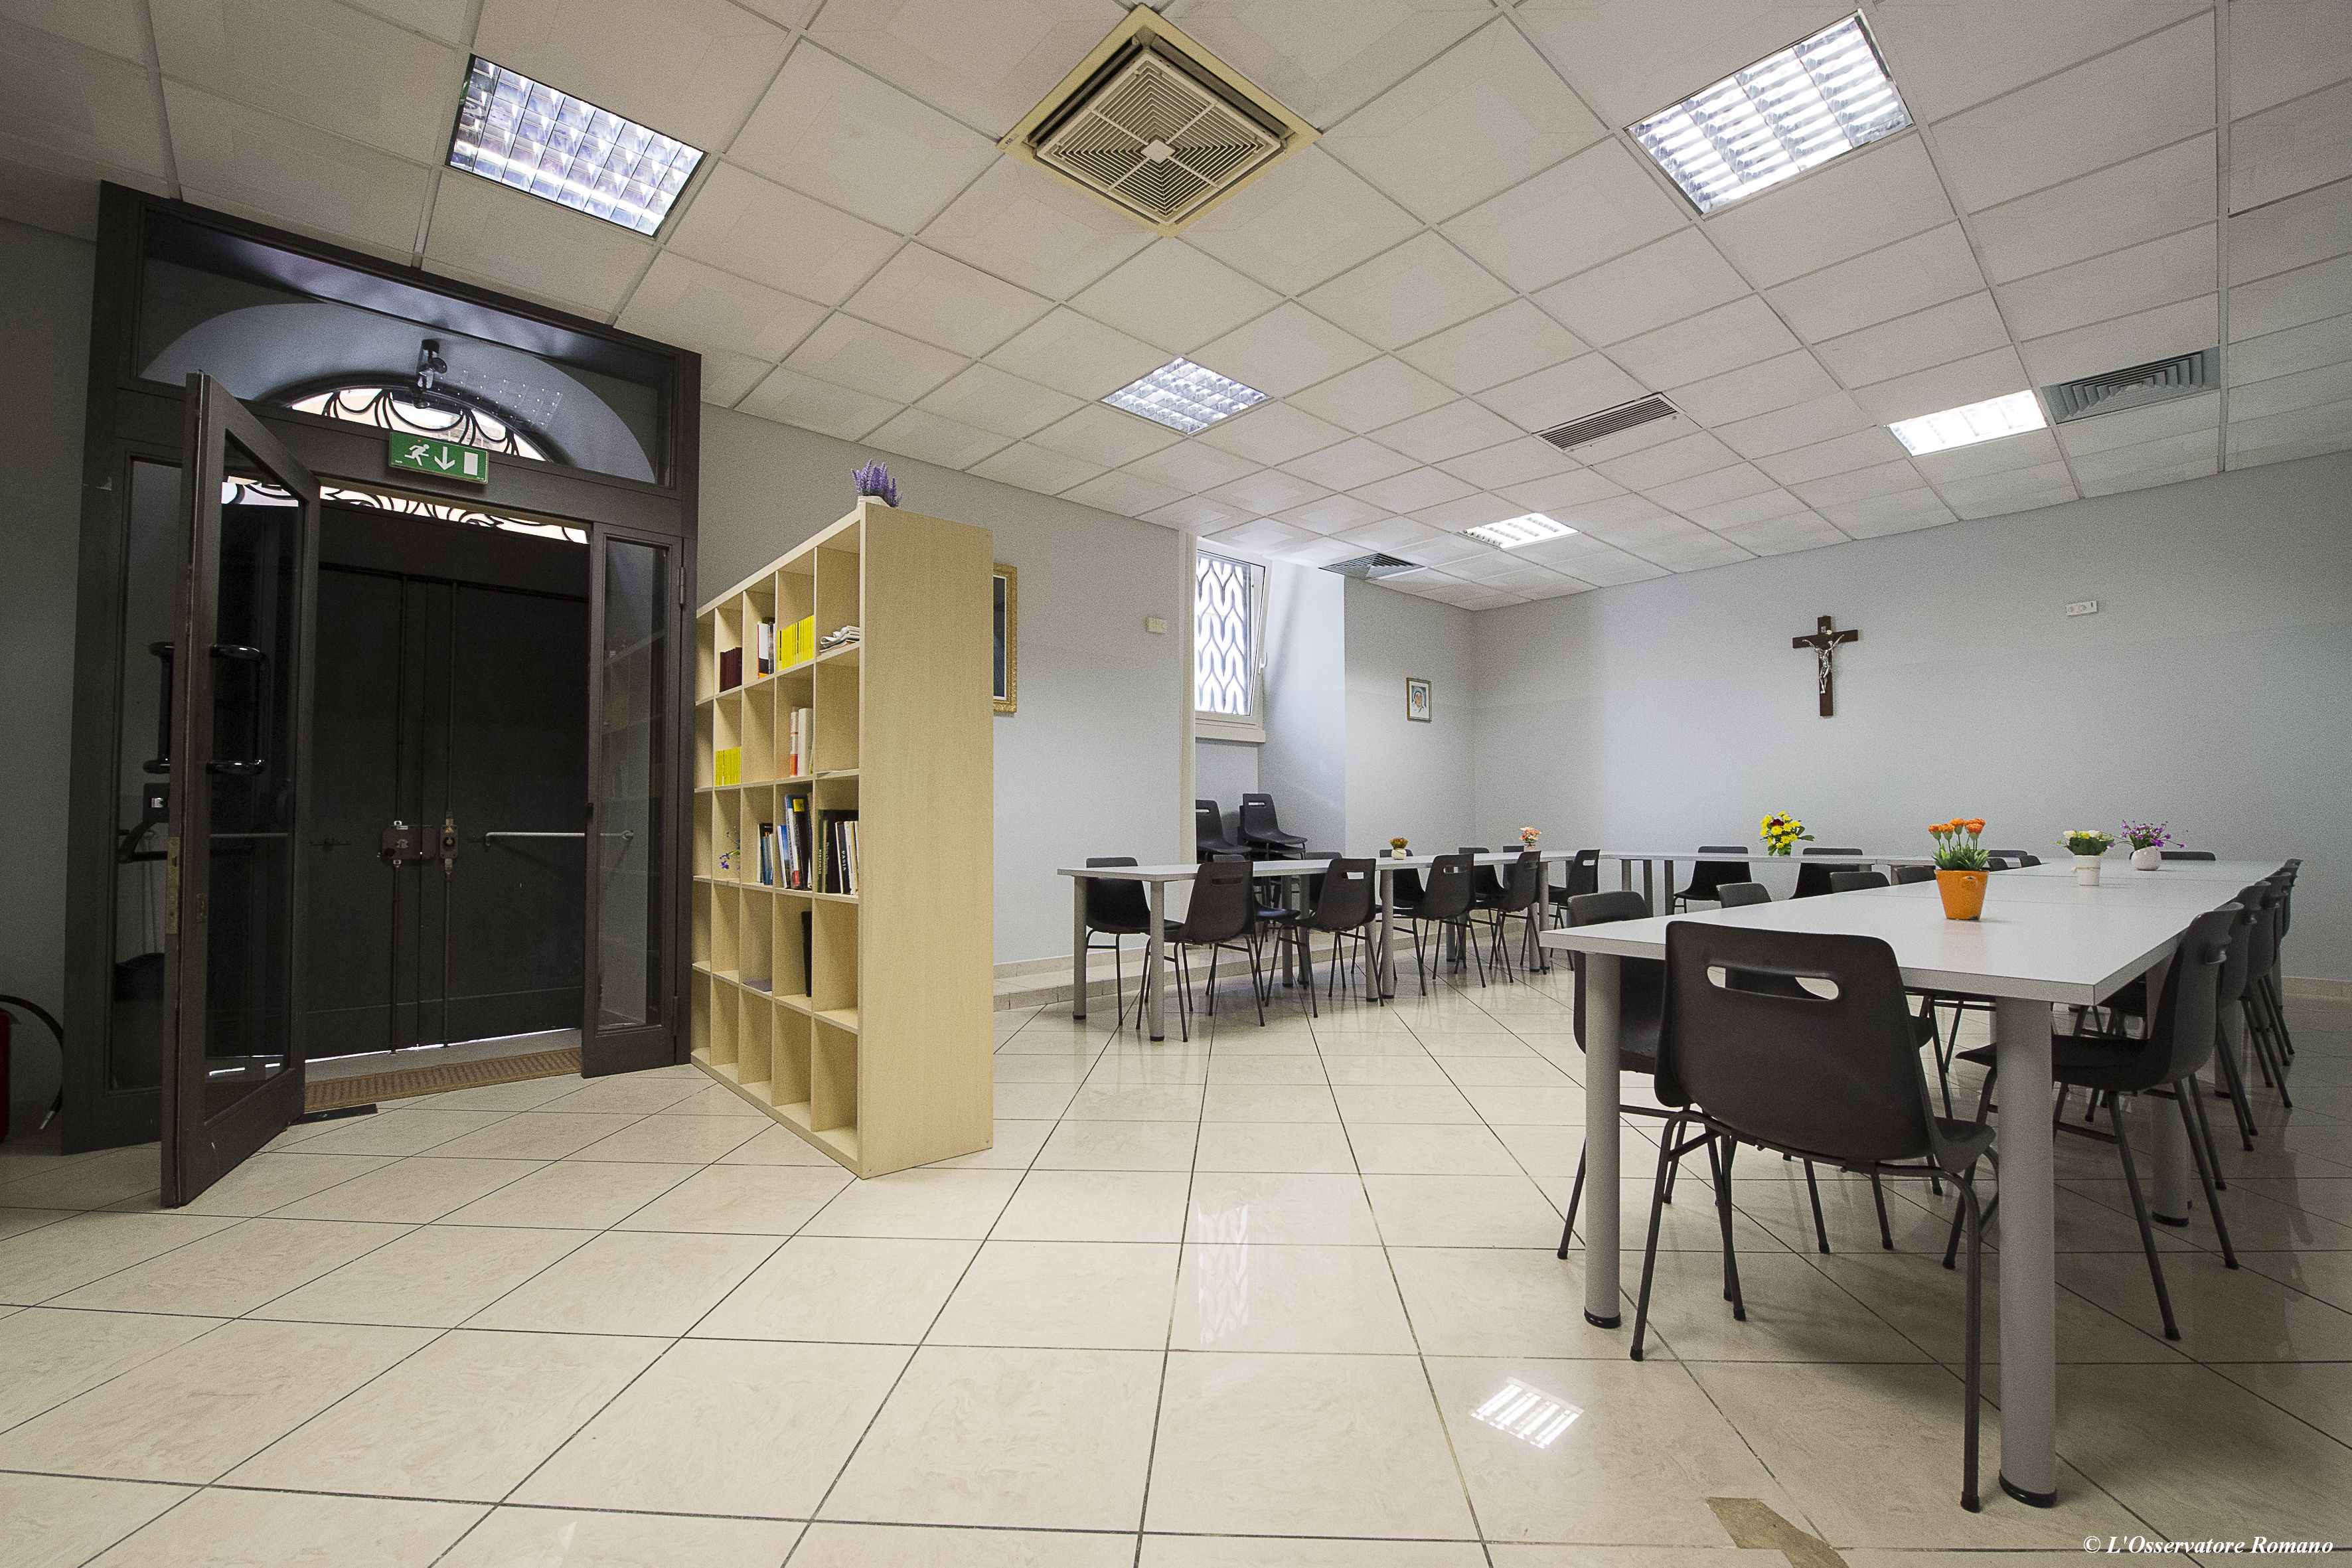 The new Rome dormitory for the homeless “Gift of Mercy”